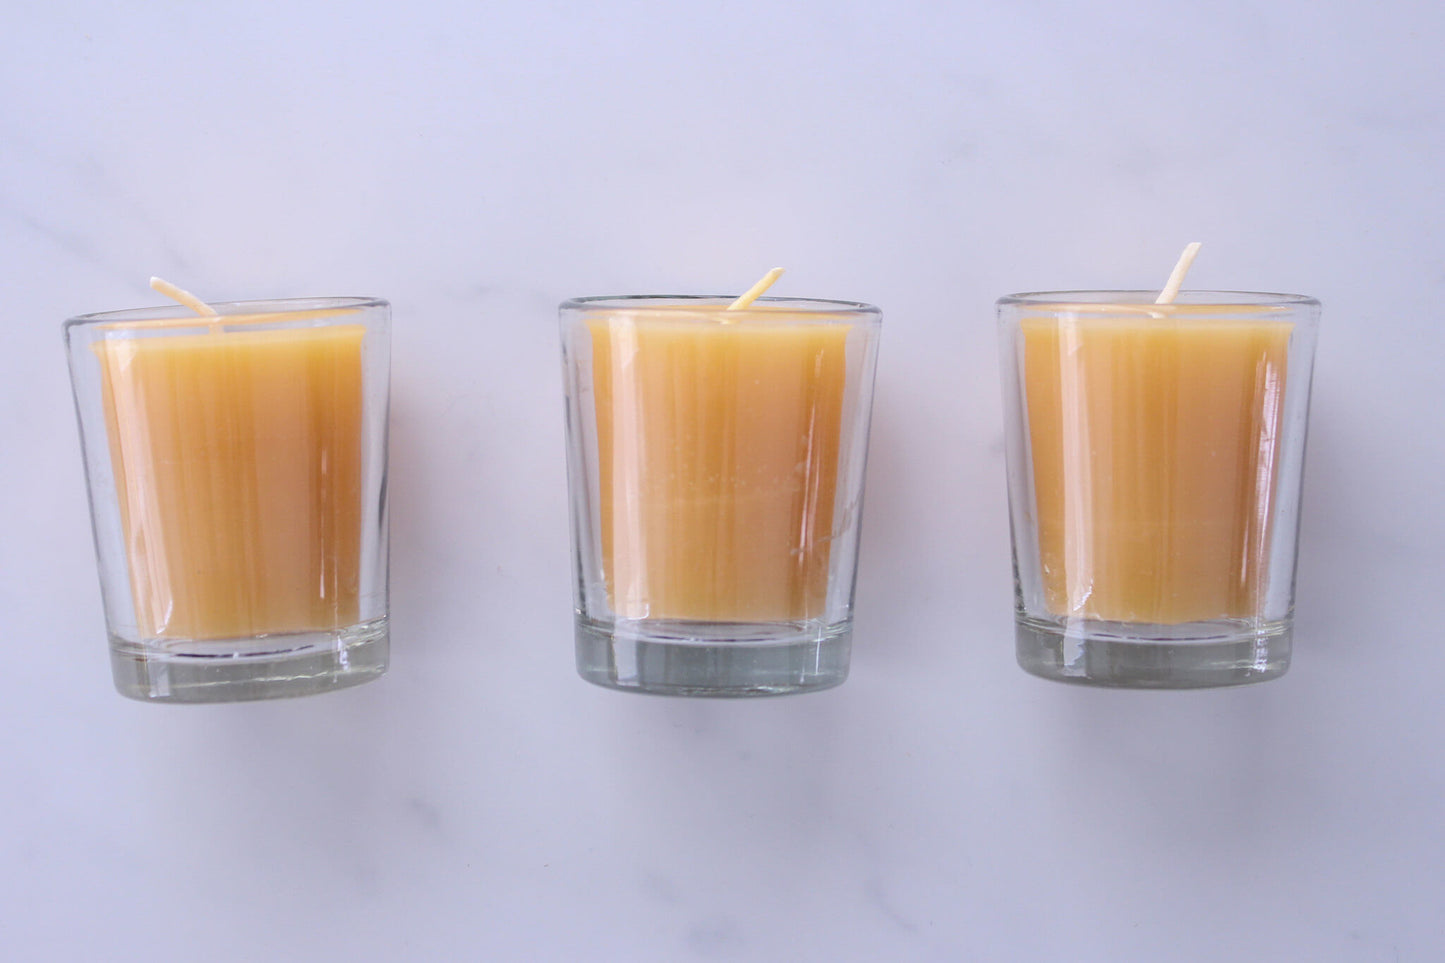 3 handmade beeswax votive candles in glass votive holders